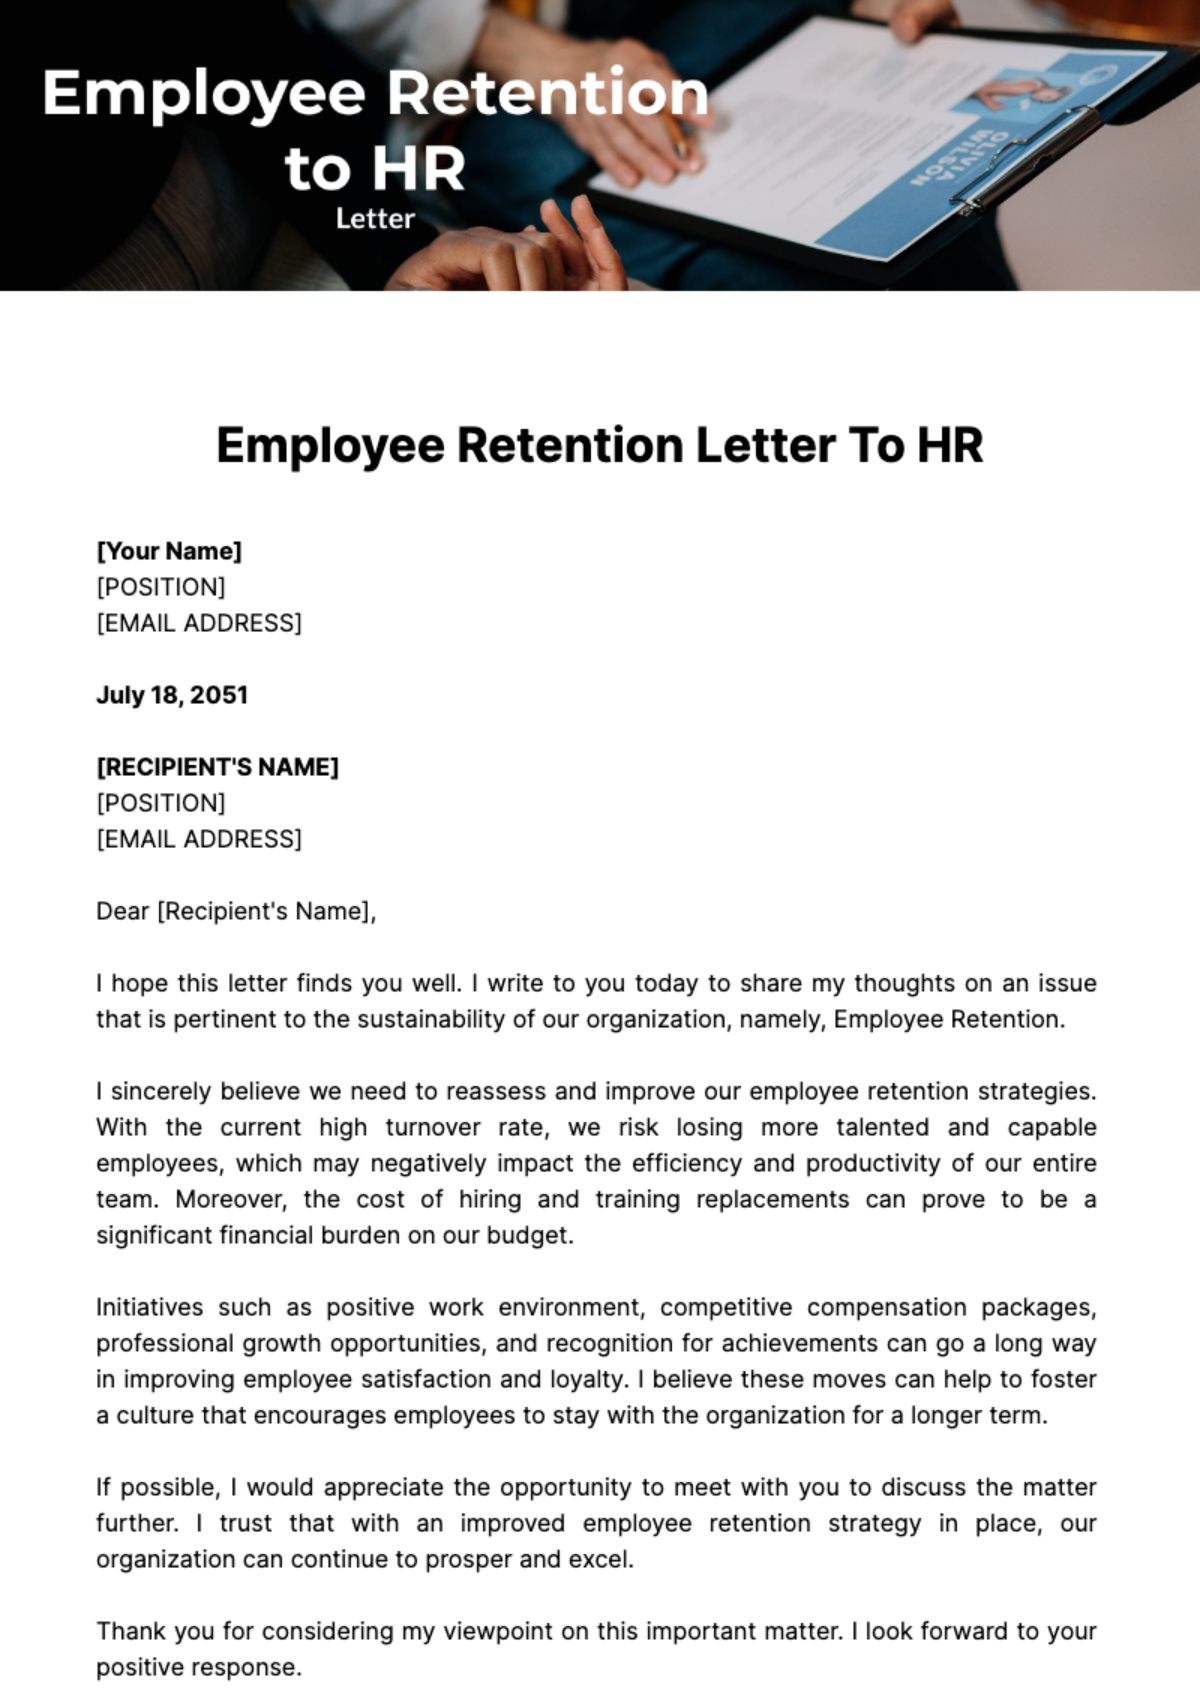 Free Employee Retention Letter to HR Template